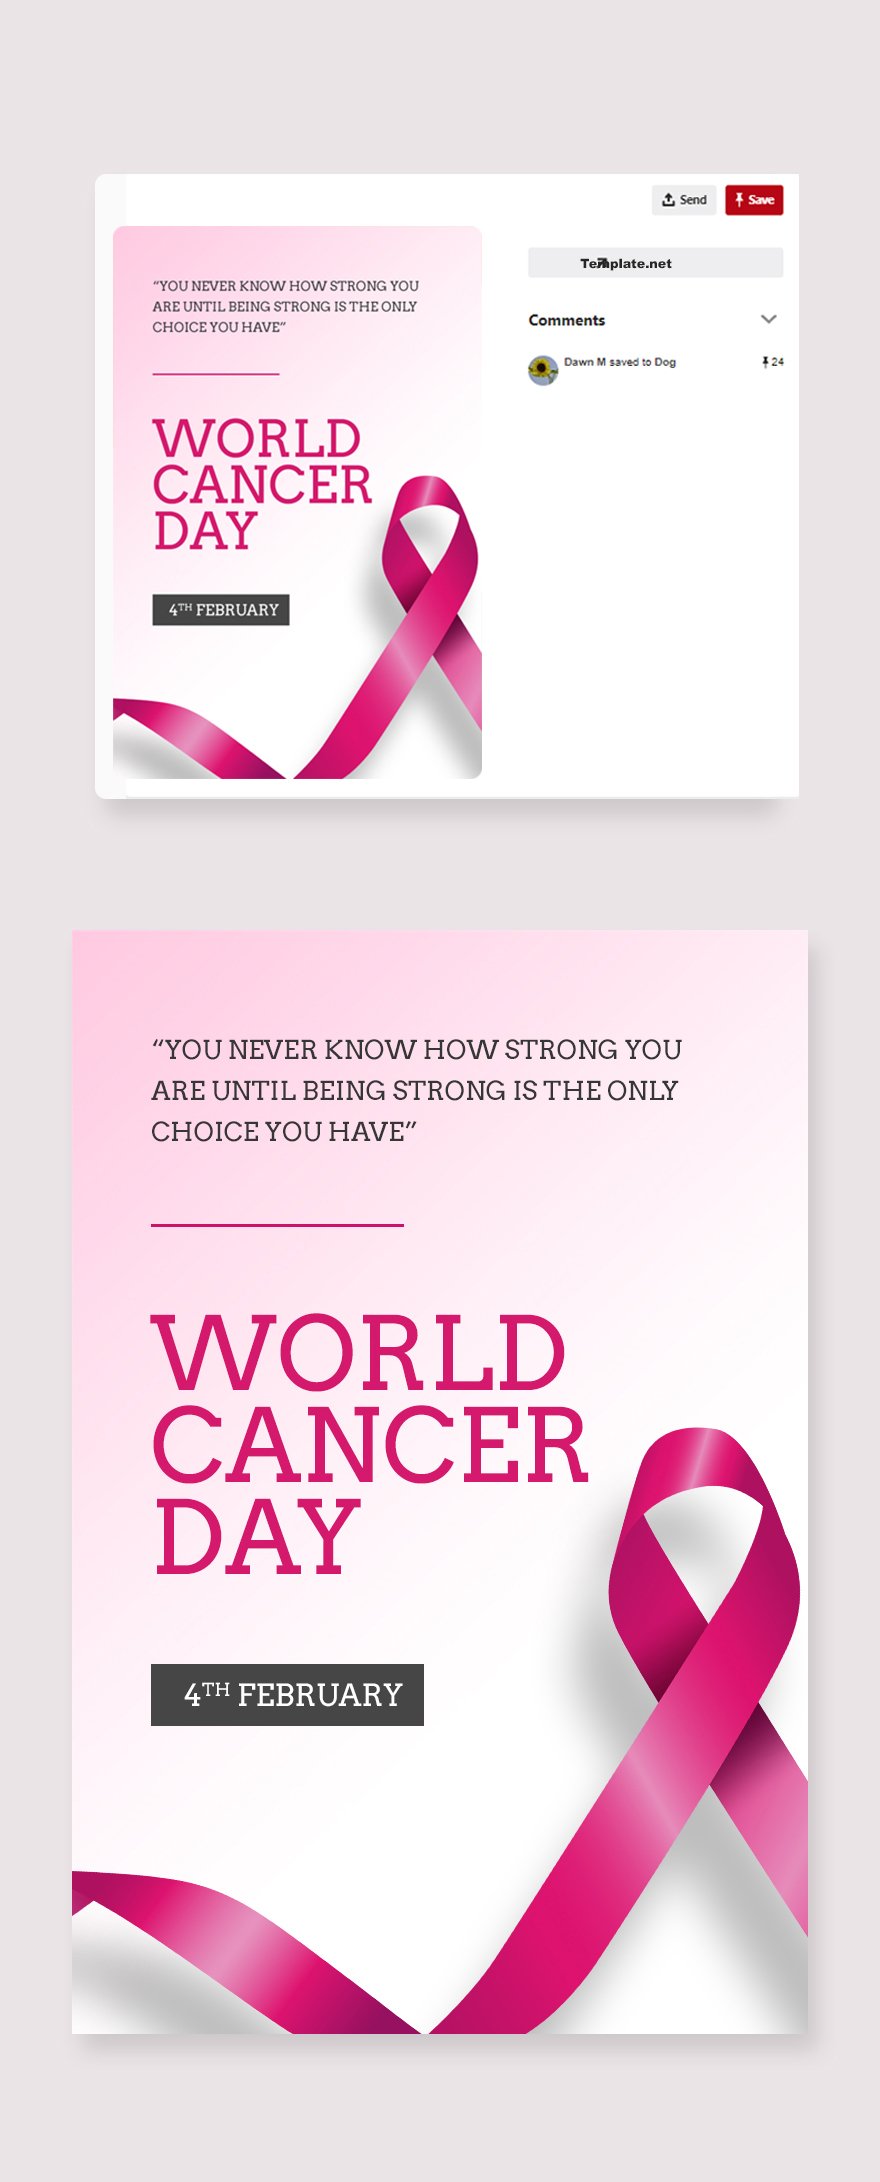 World Cancer Day Pinterest Pin Template in PSD